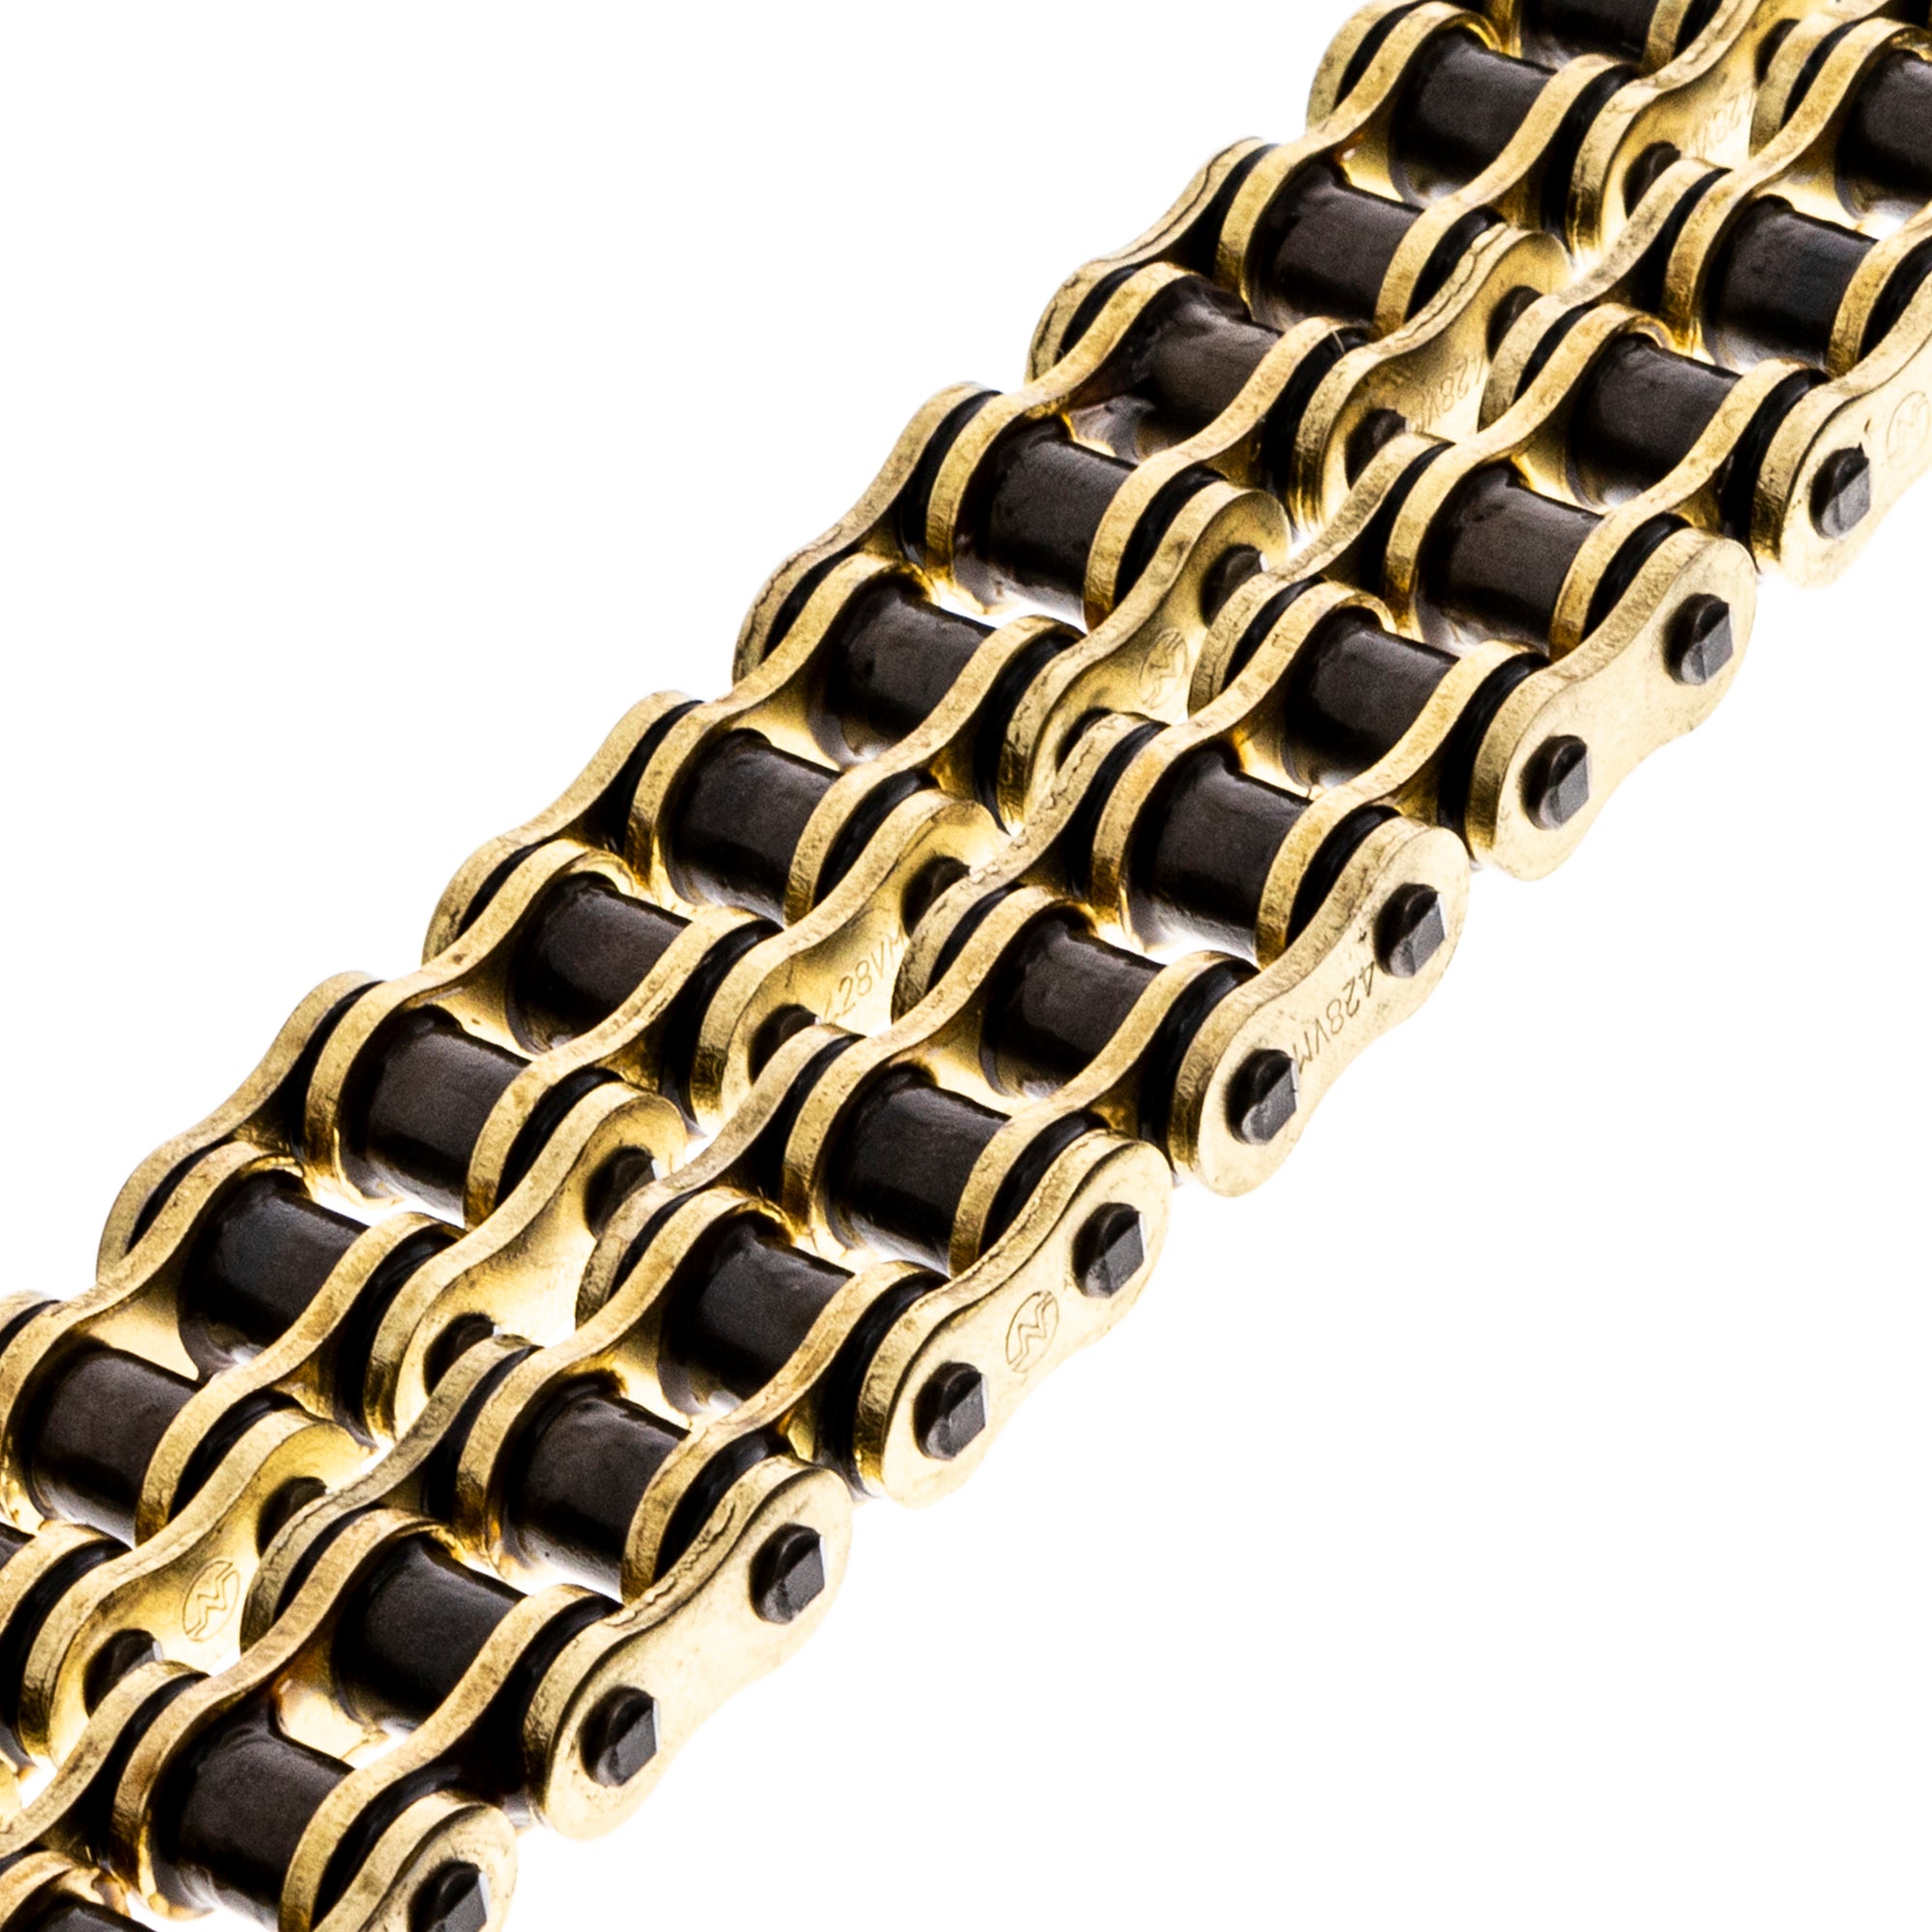 Gold X-Ring Chain 106 w/ Master Link for zOTHER G3 5515 NICHE 519-CDC2626H